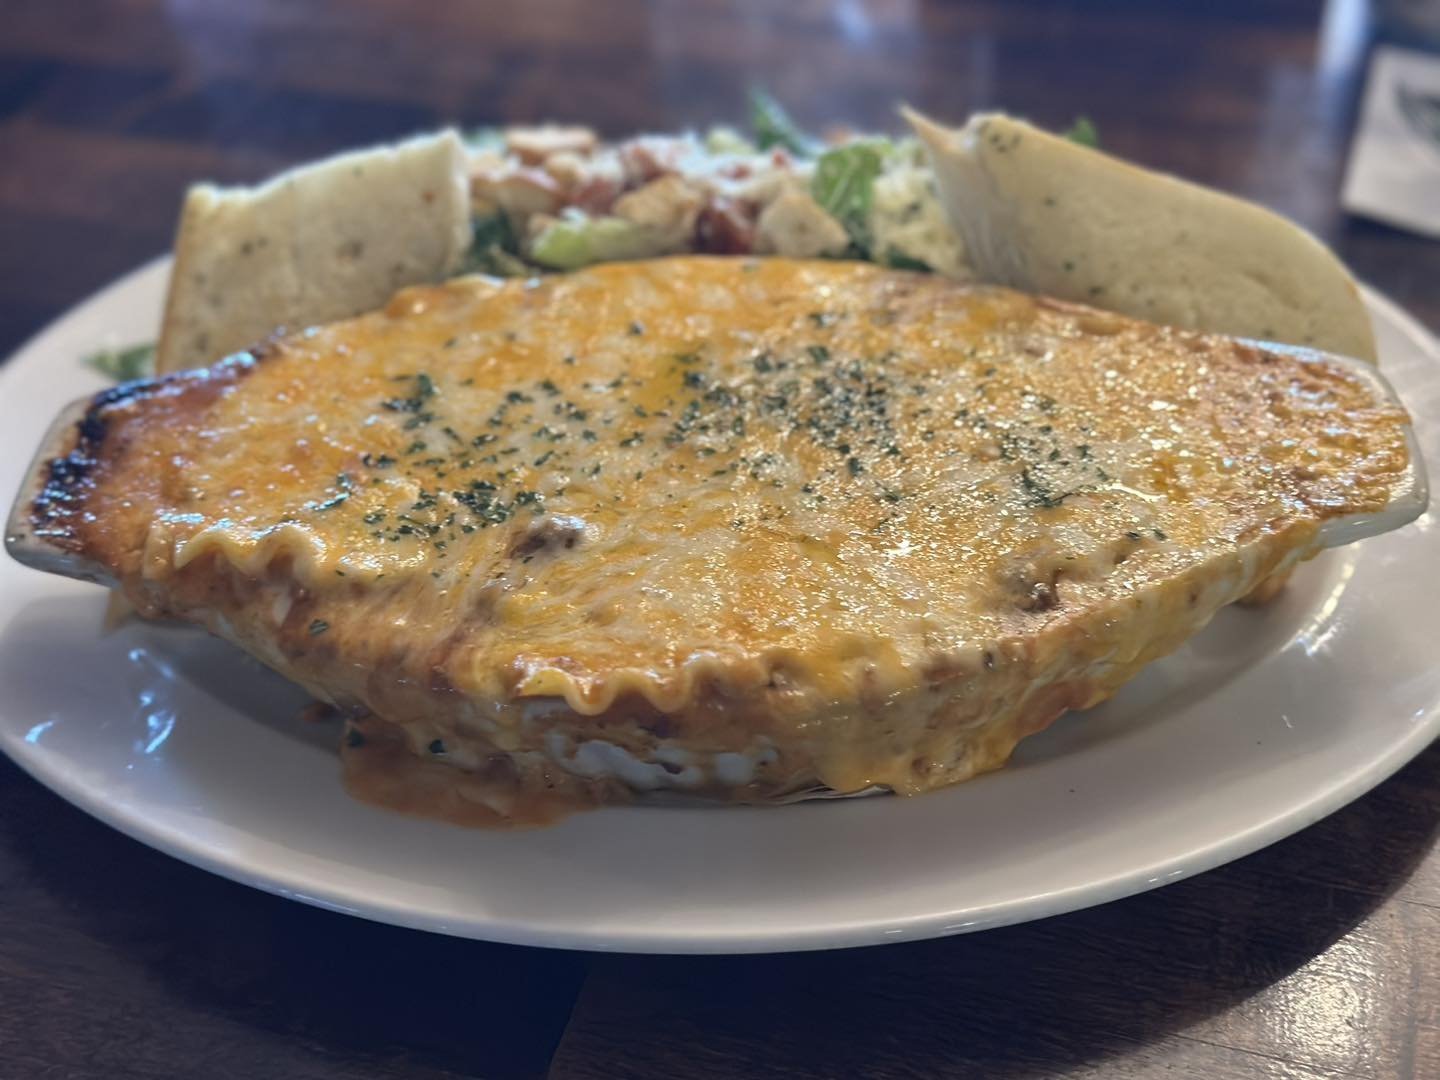 Combat the chill with our Epic Baked Lasagna for Lunch!  Served with Caesar salad, garlic toast and a Beverage for $26

Available 11-2 pm or while supplies lasts.